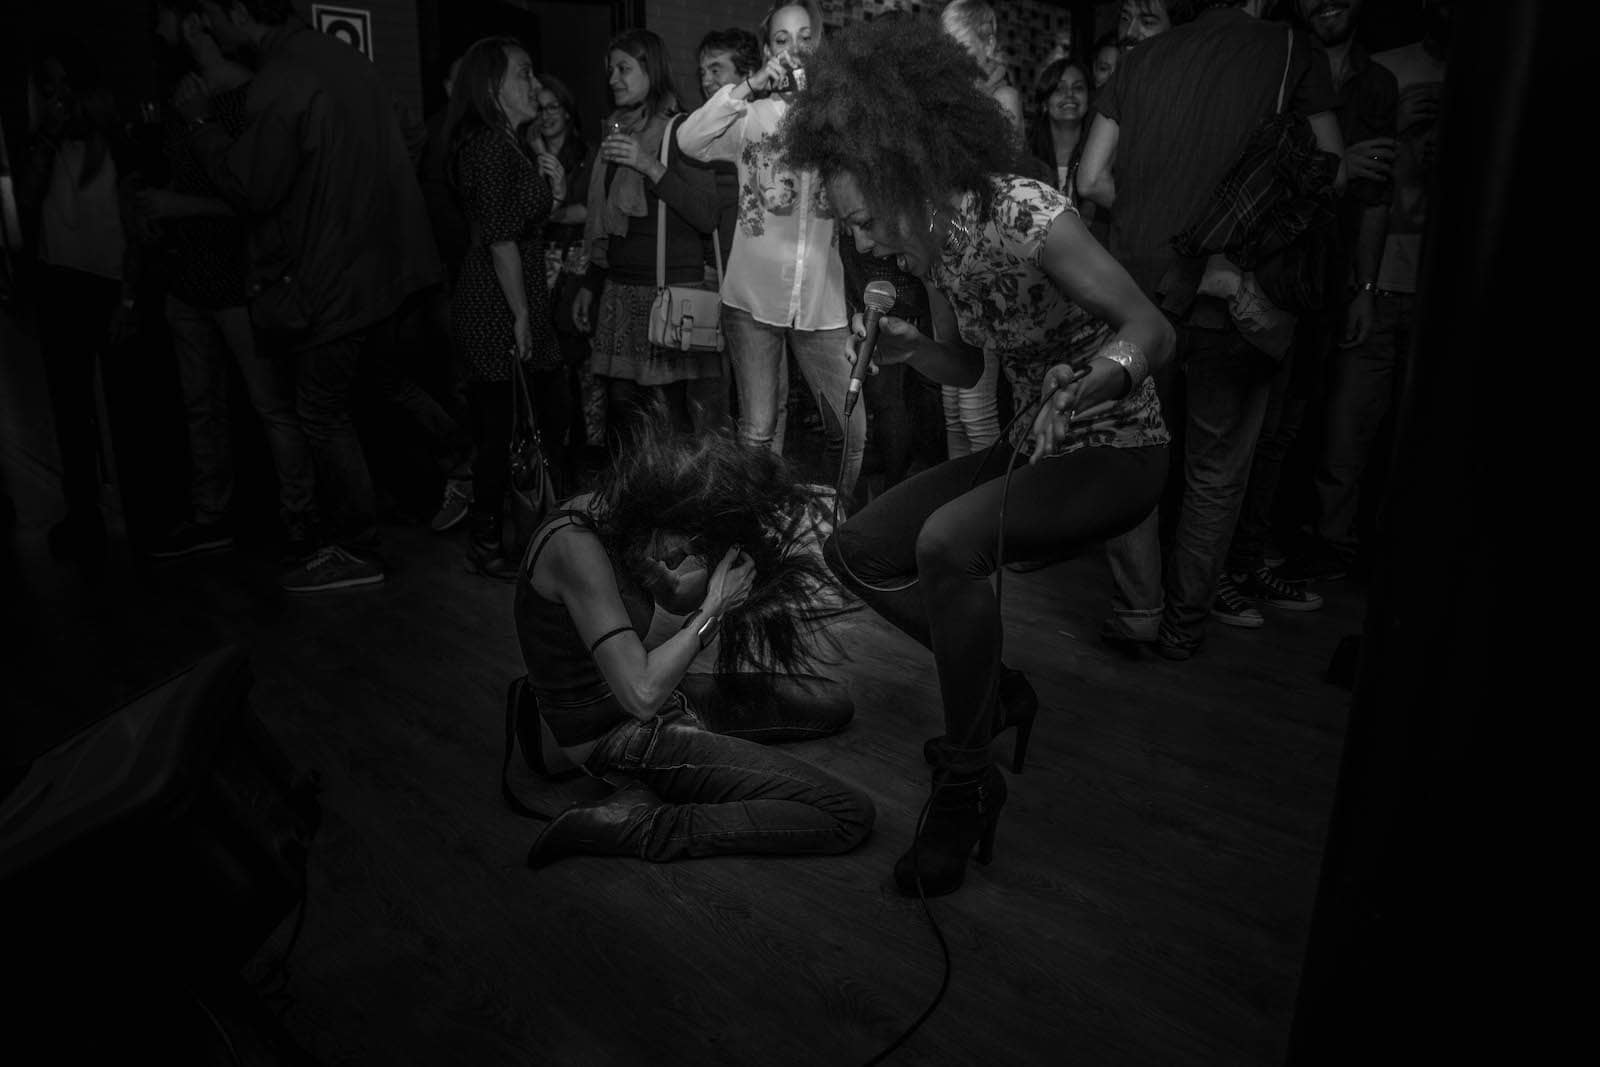 Female singer jumping to the air and another woman kneeling on the ground right next to her